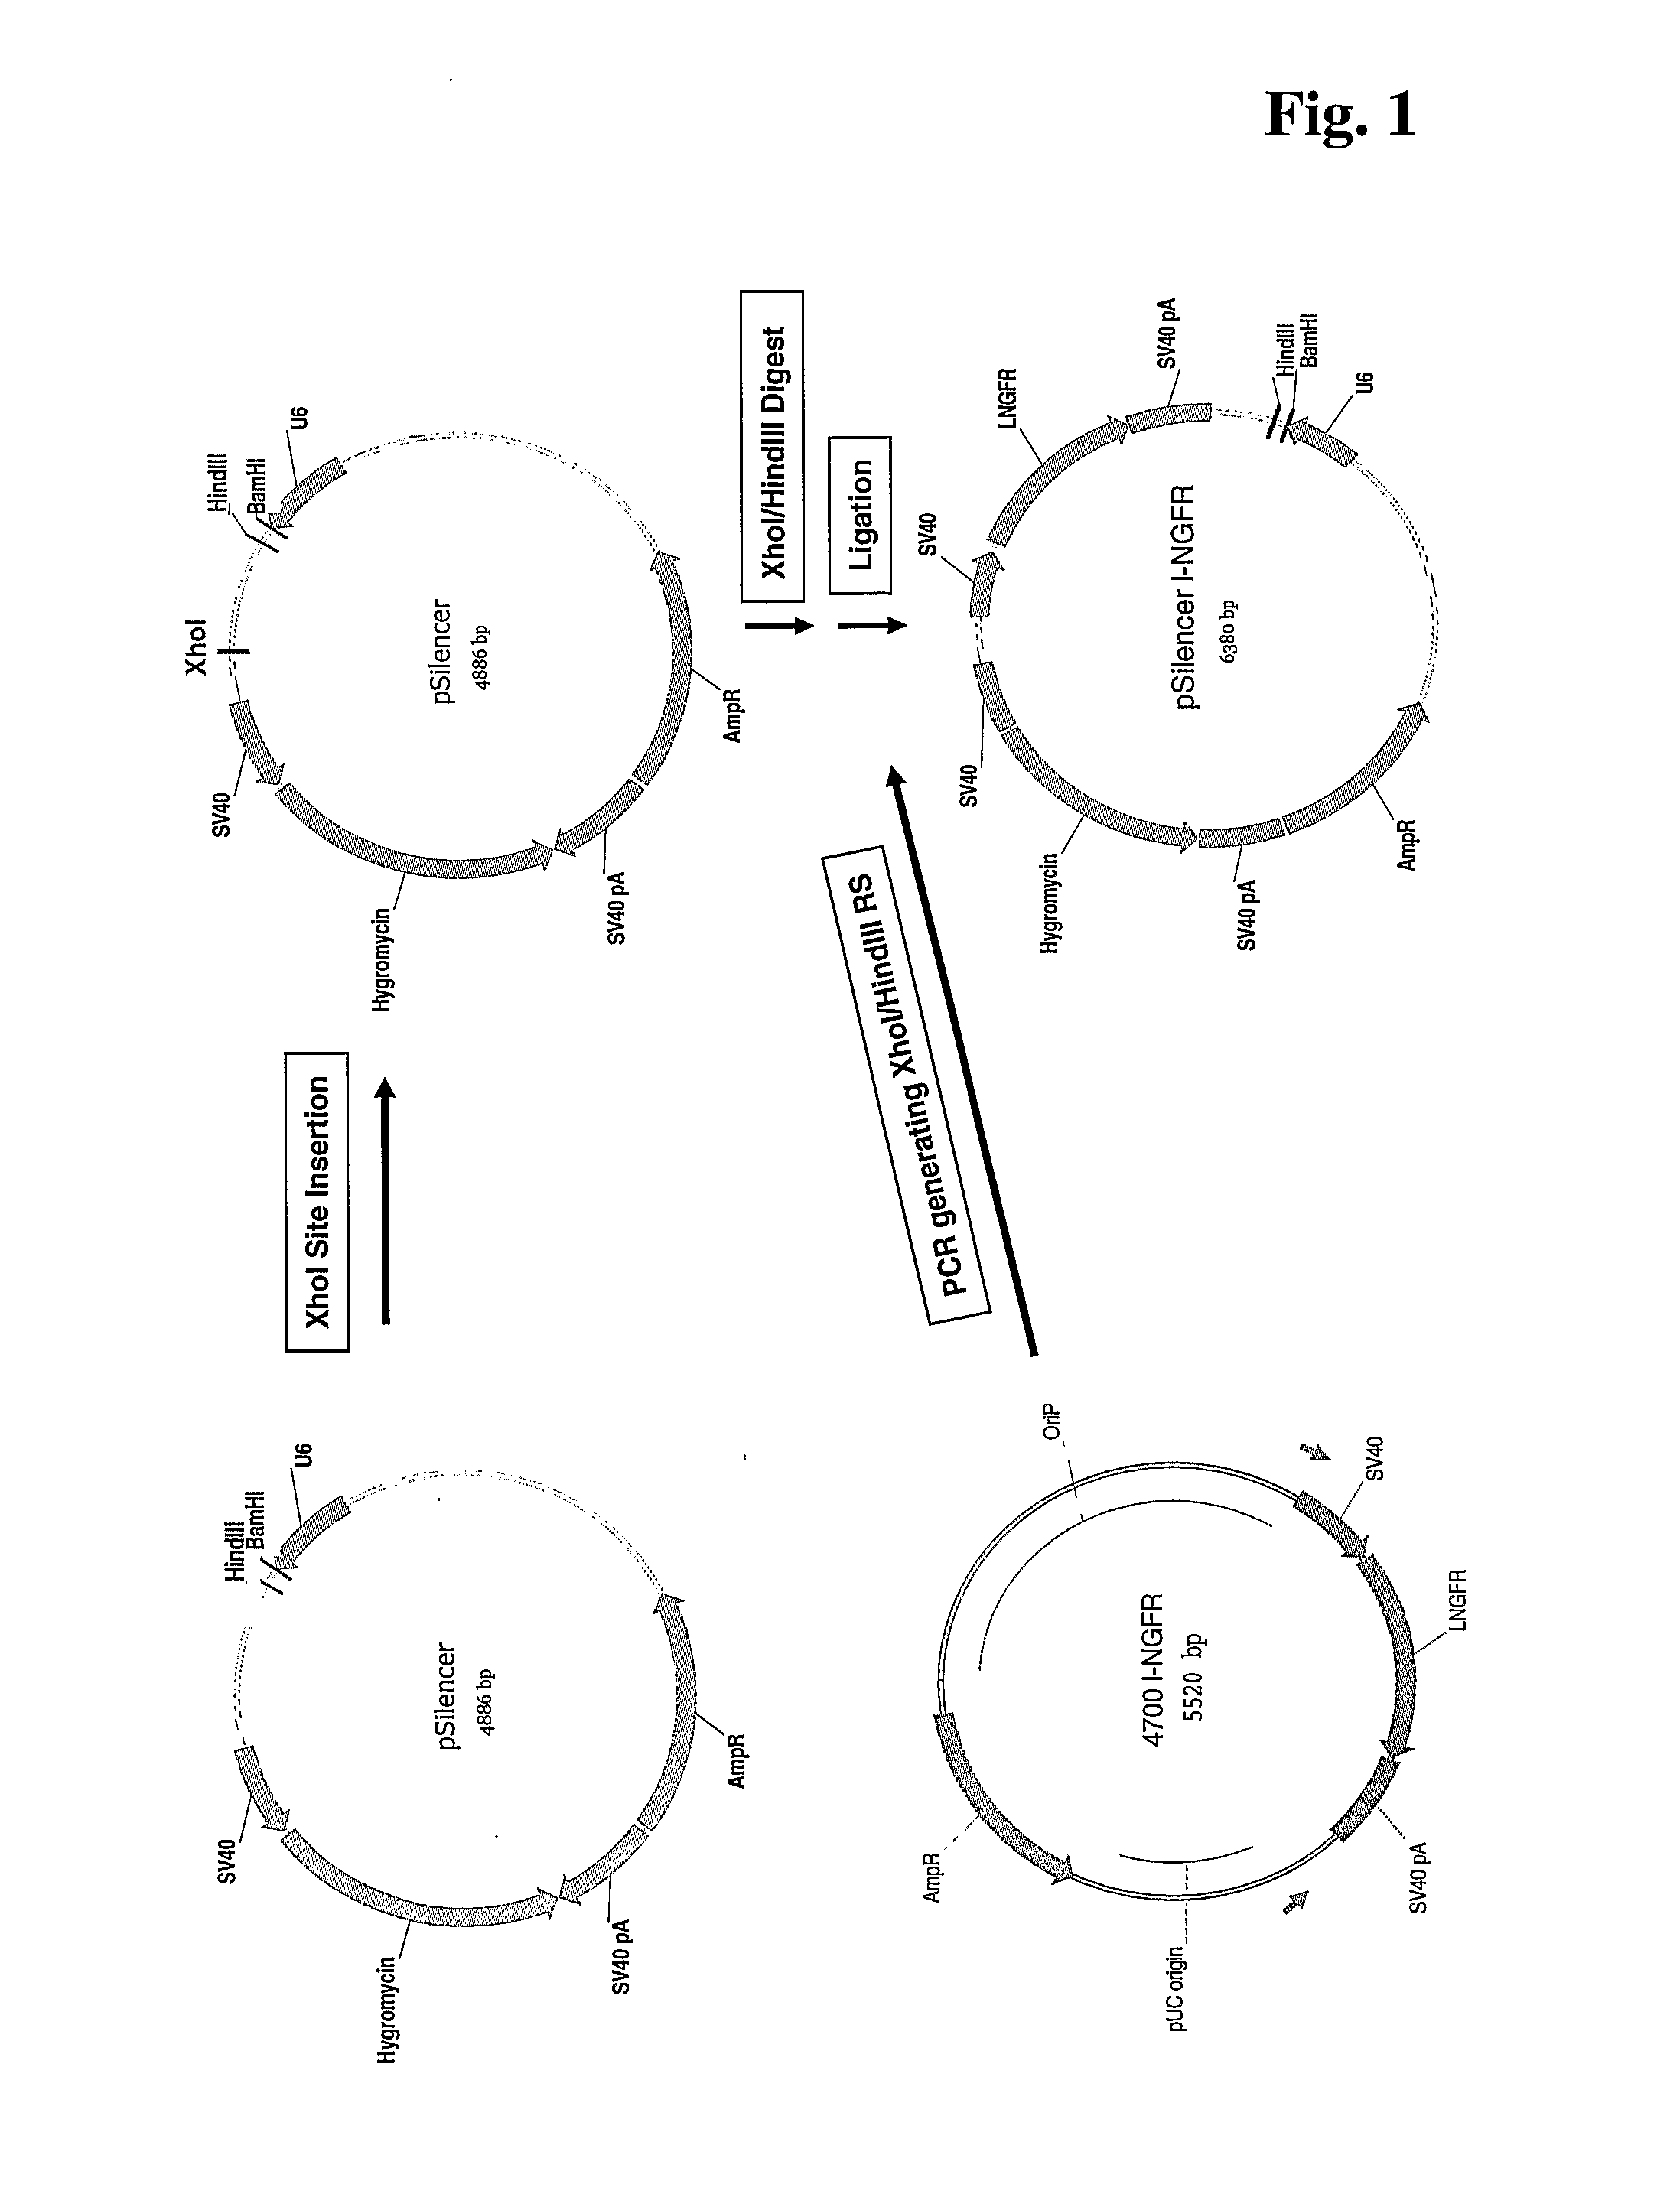 Method for Improved Selection of Rnai Transfectants